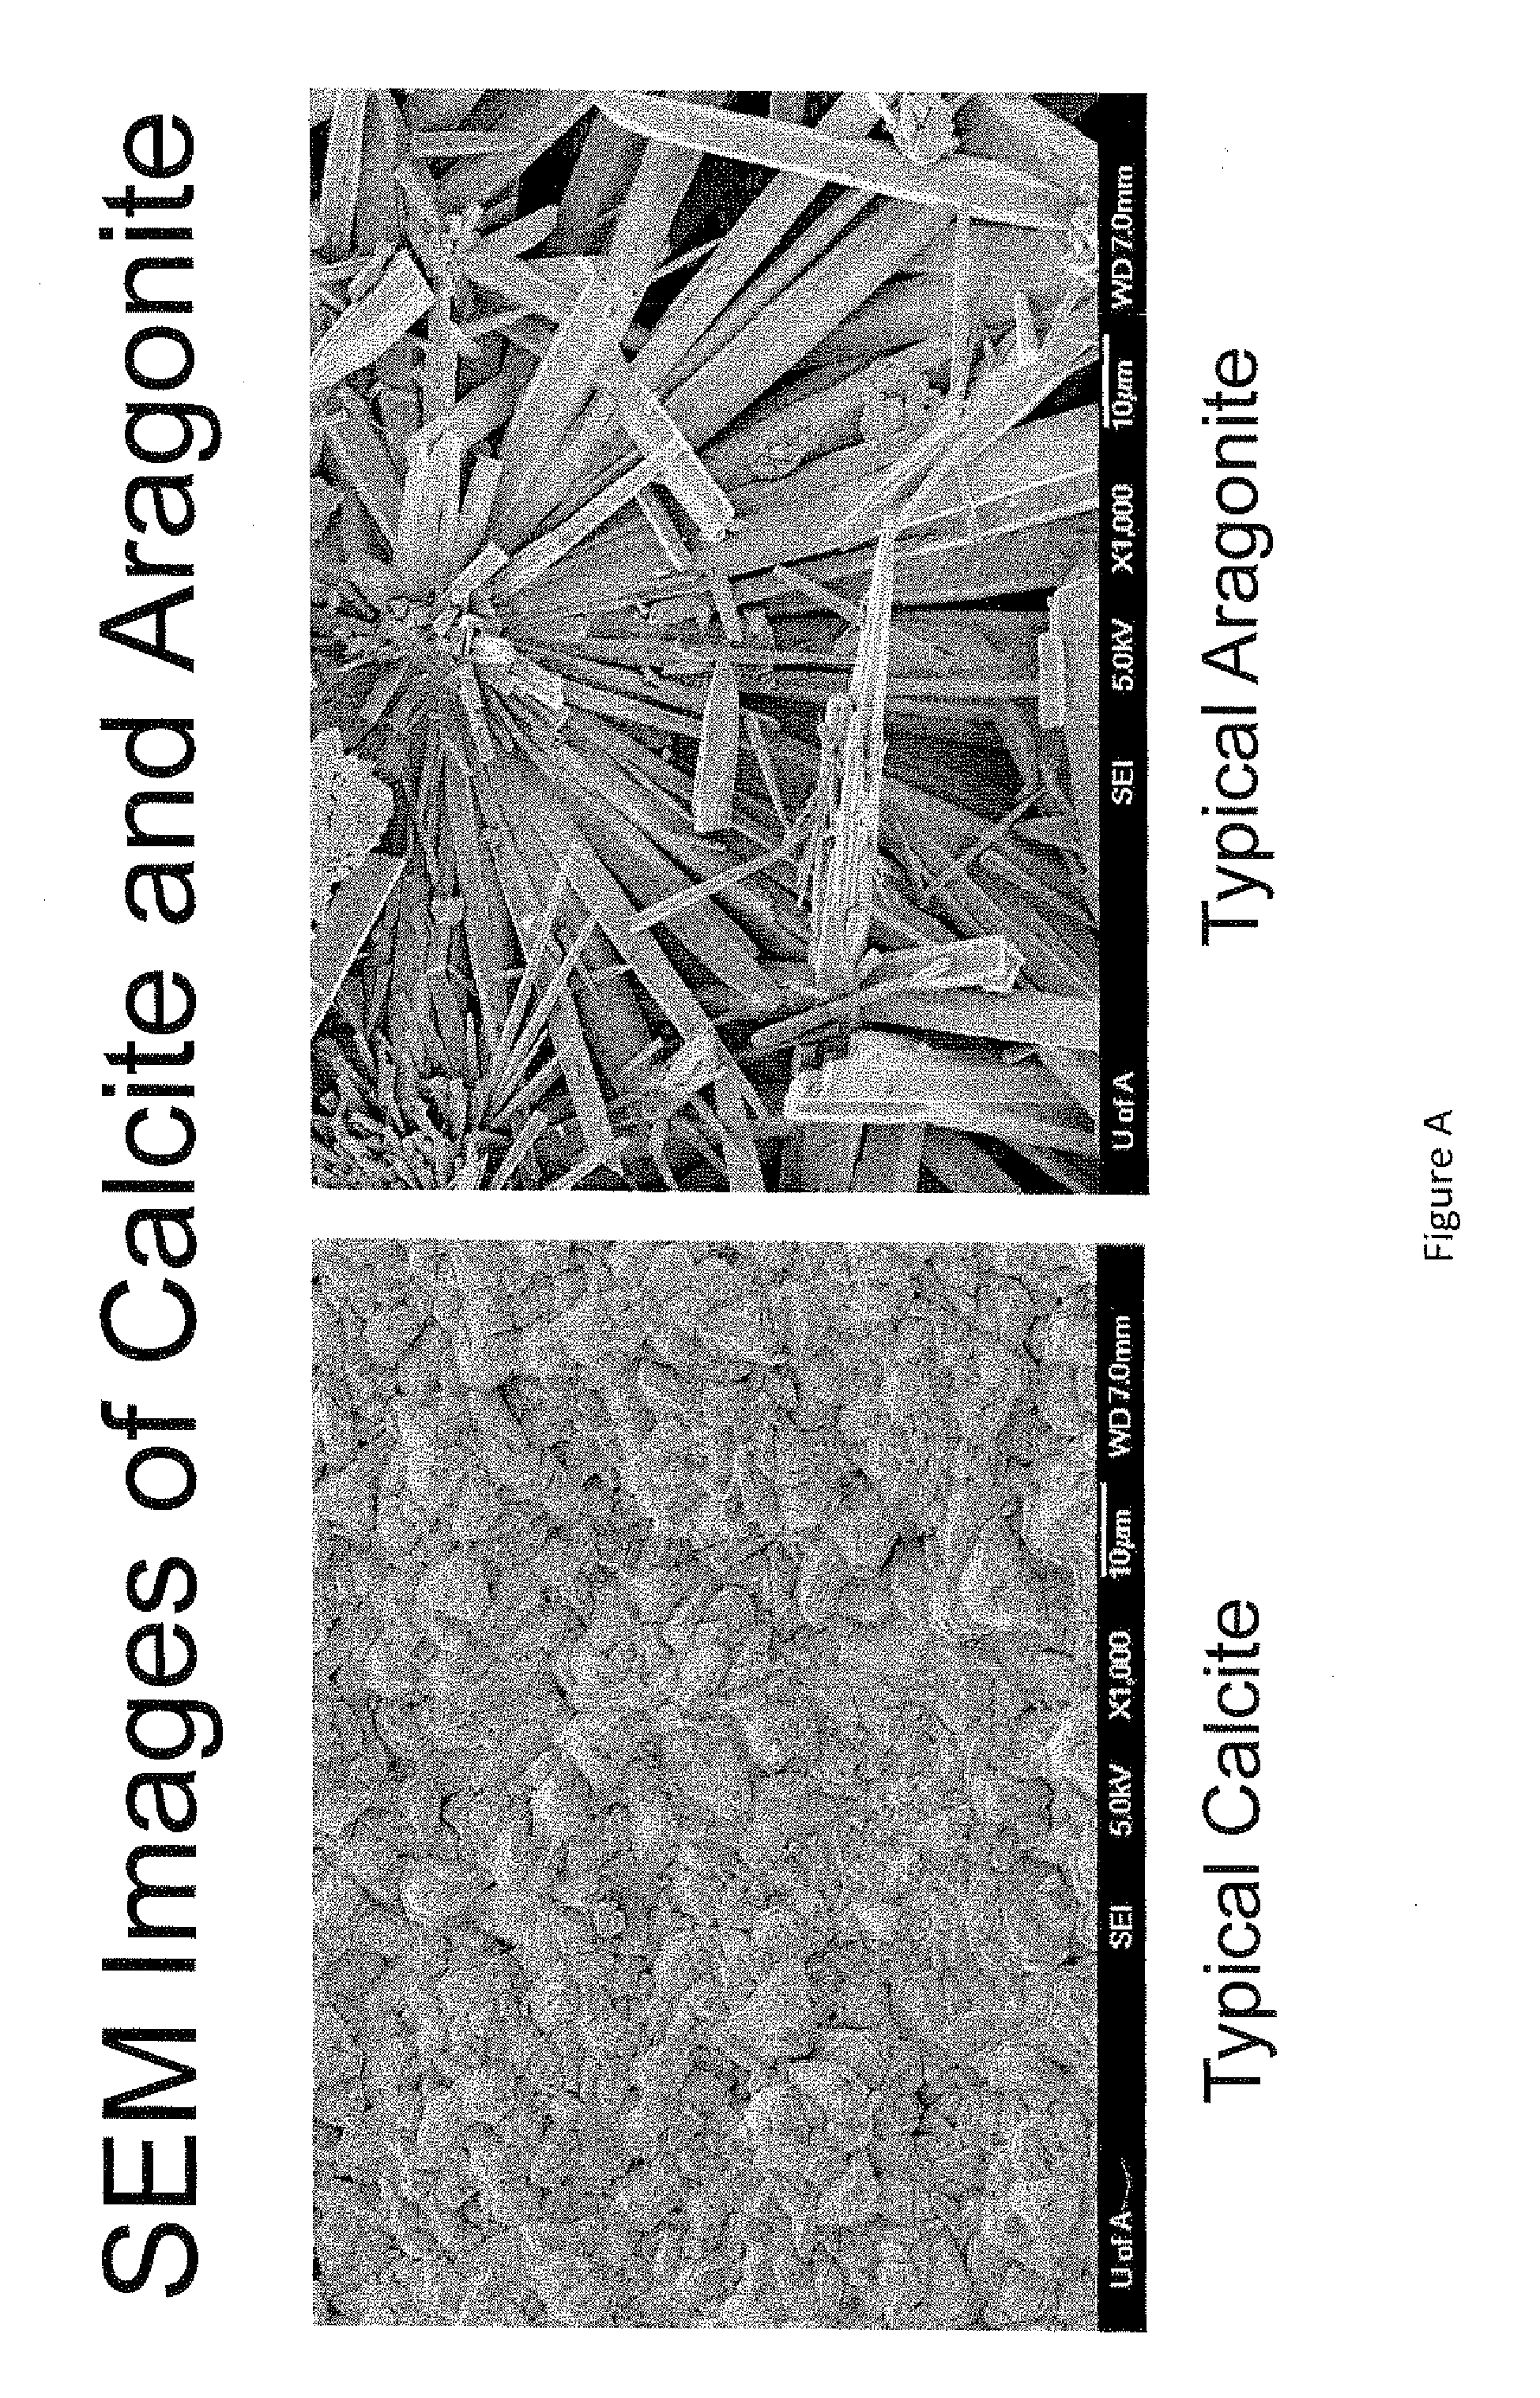 Anti-scale water treatment system and method